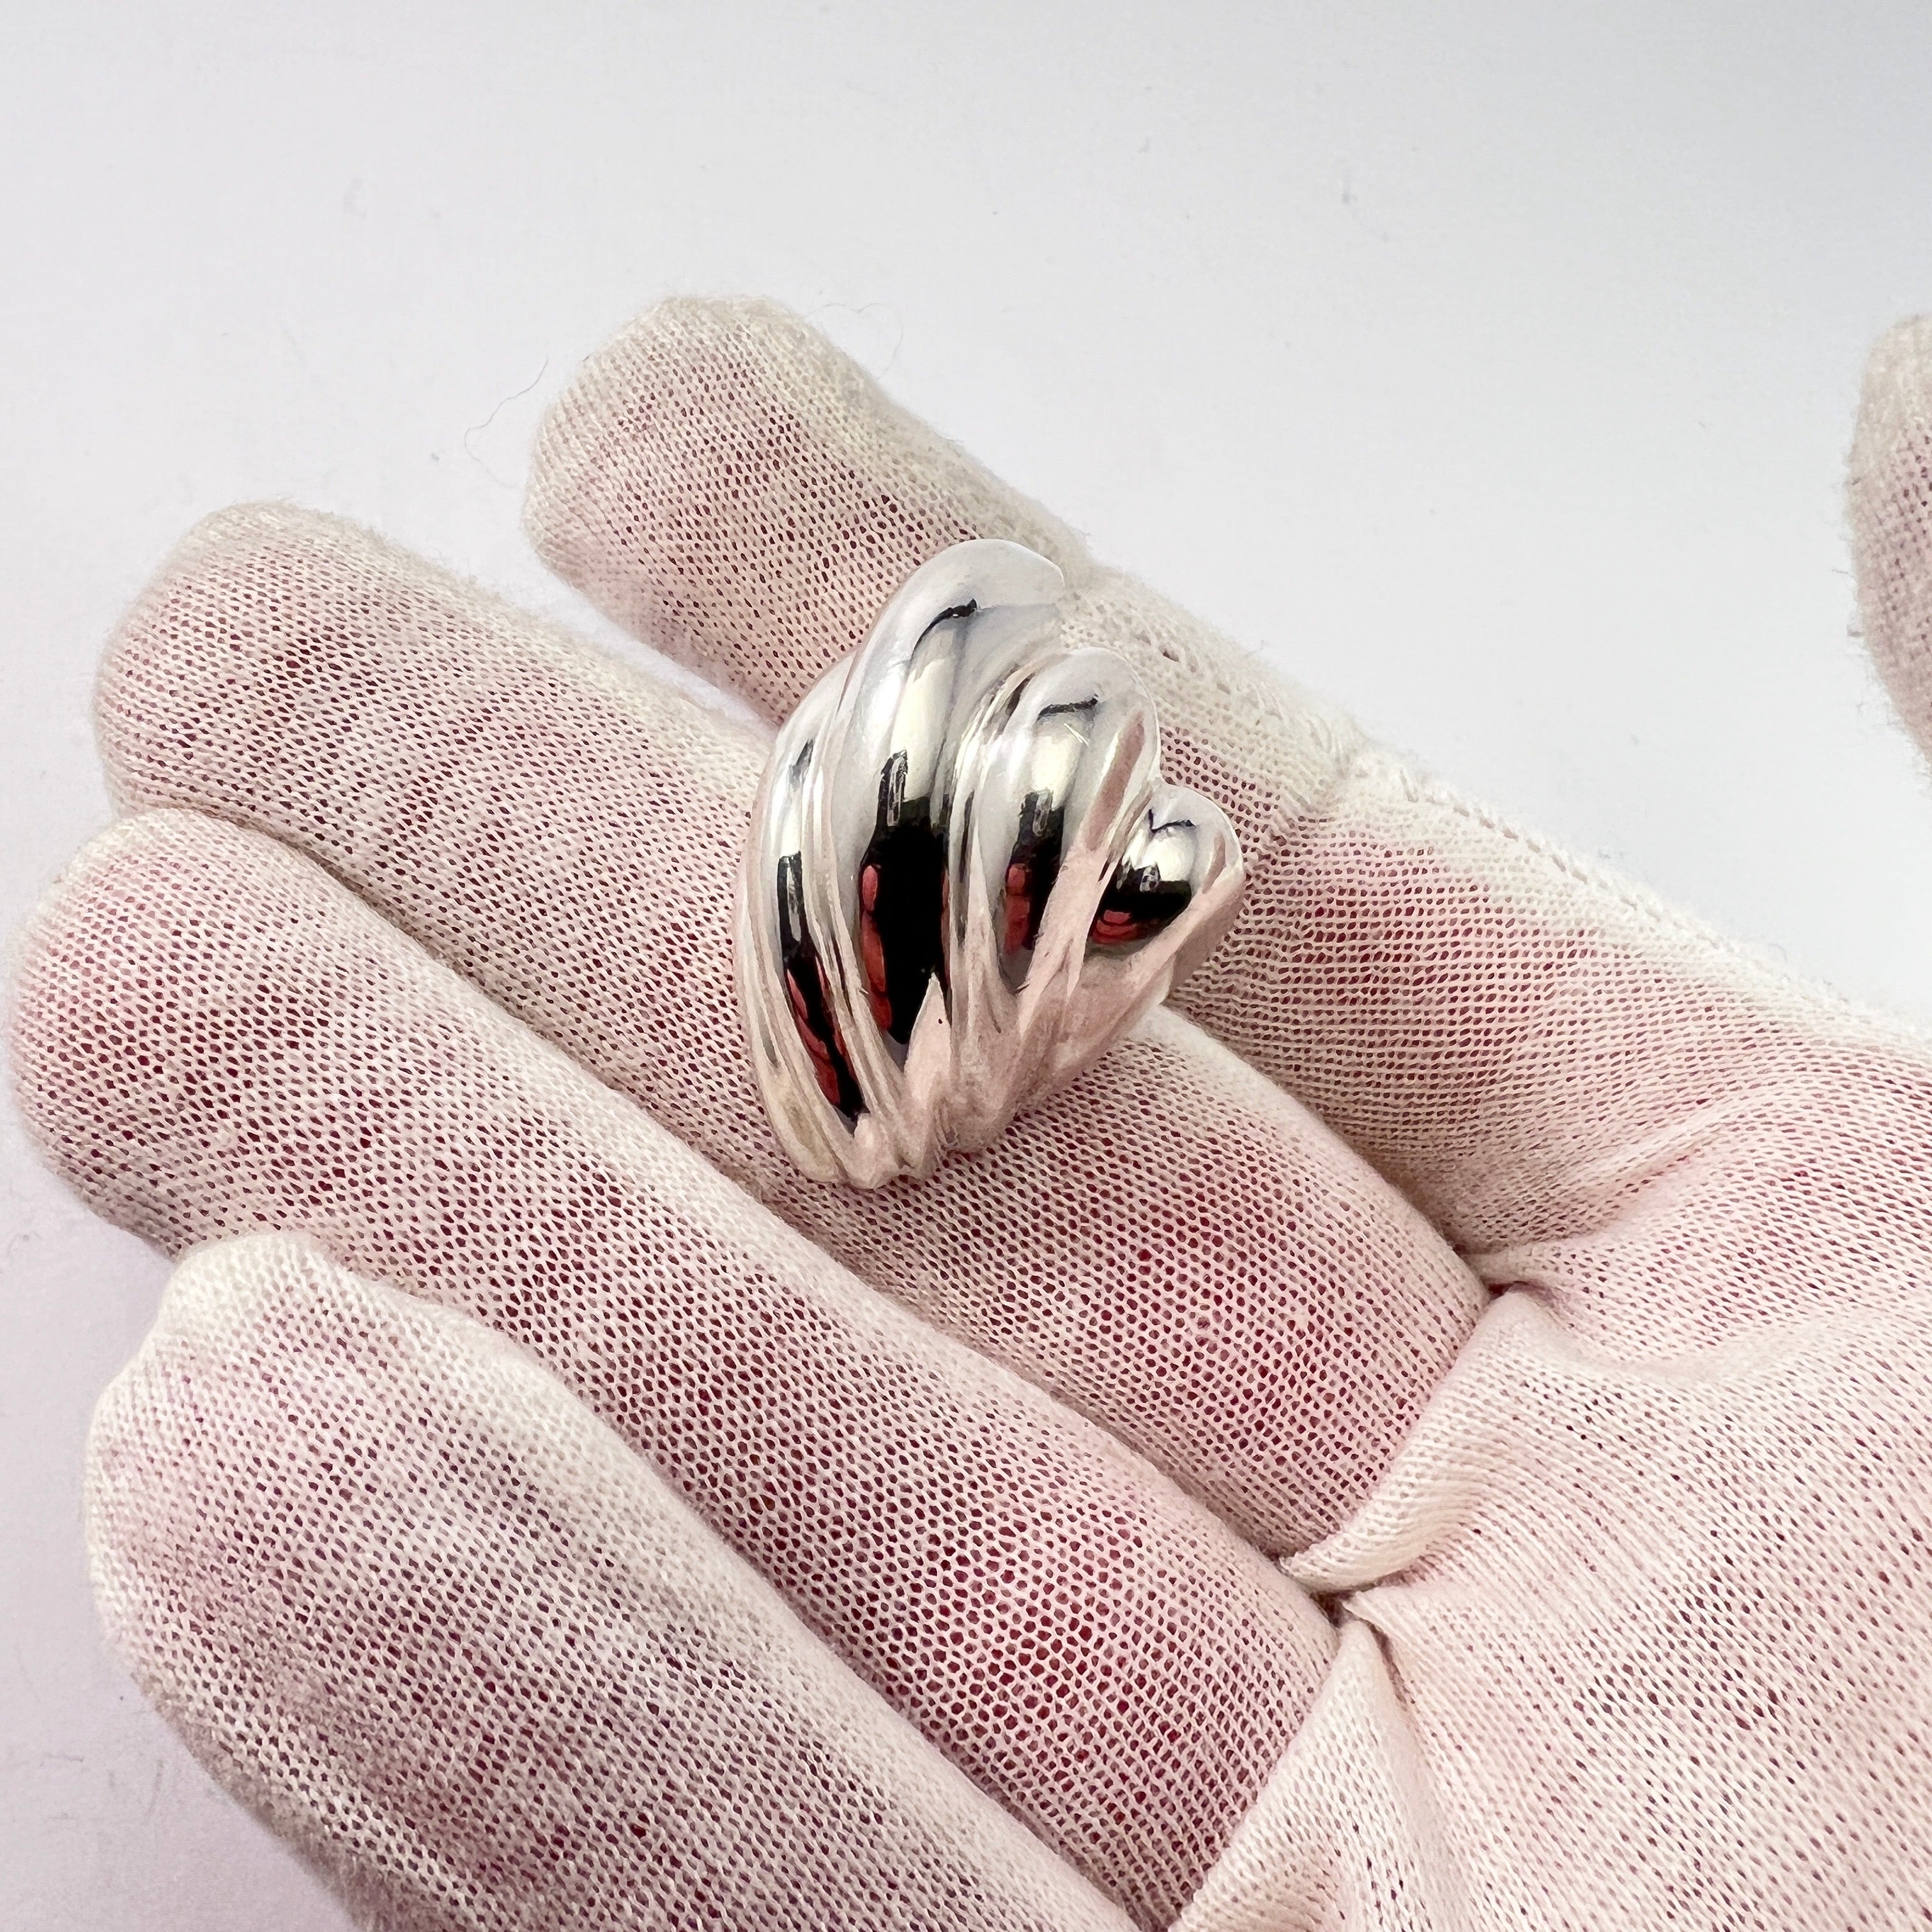 Mexico. Chunky 28.7gram Vintage Sterling Silver Ring.